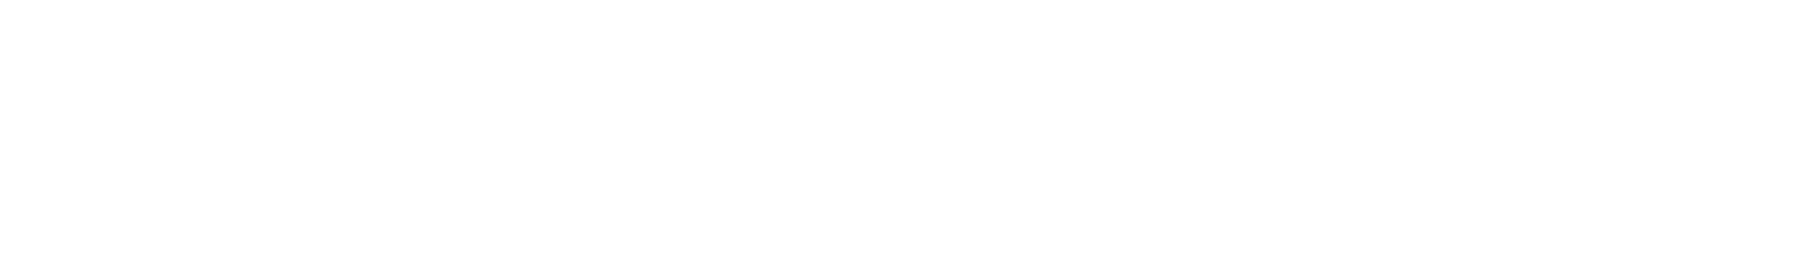 Delight Brand Clothing Home